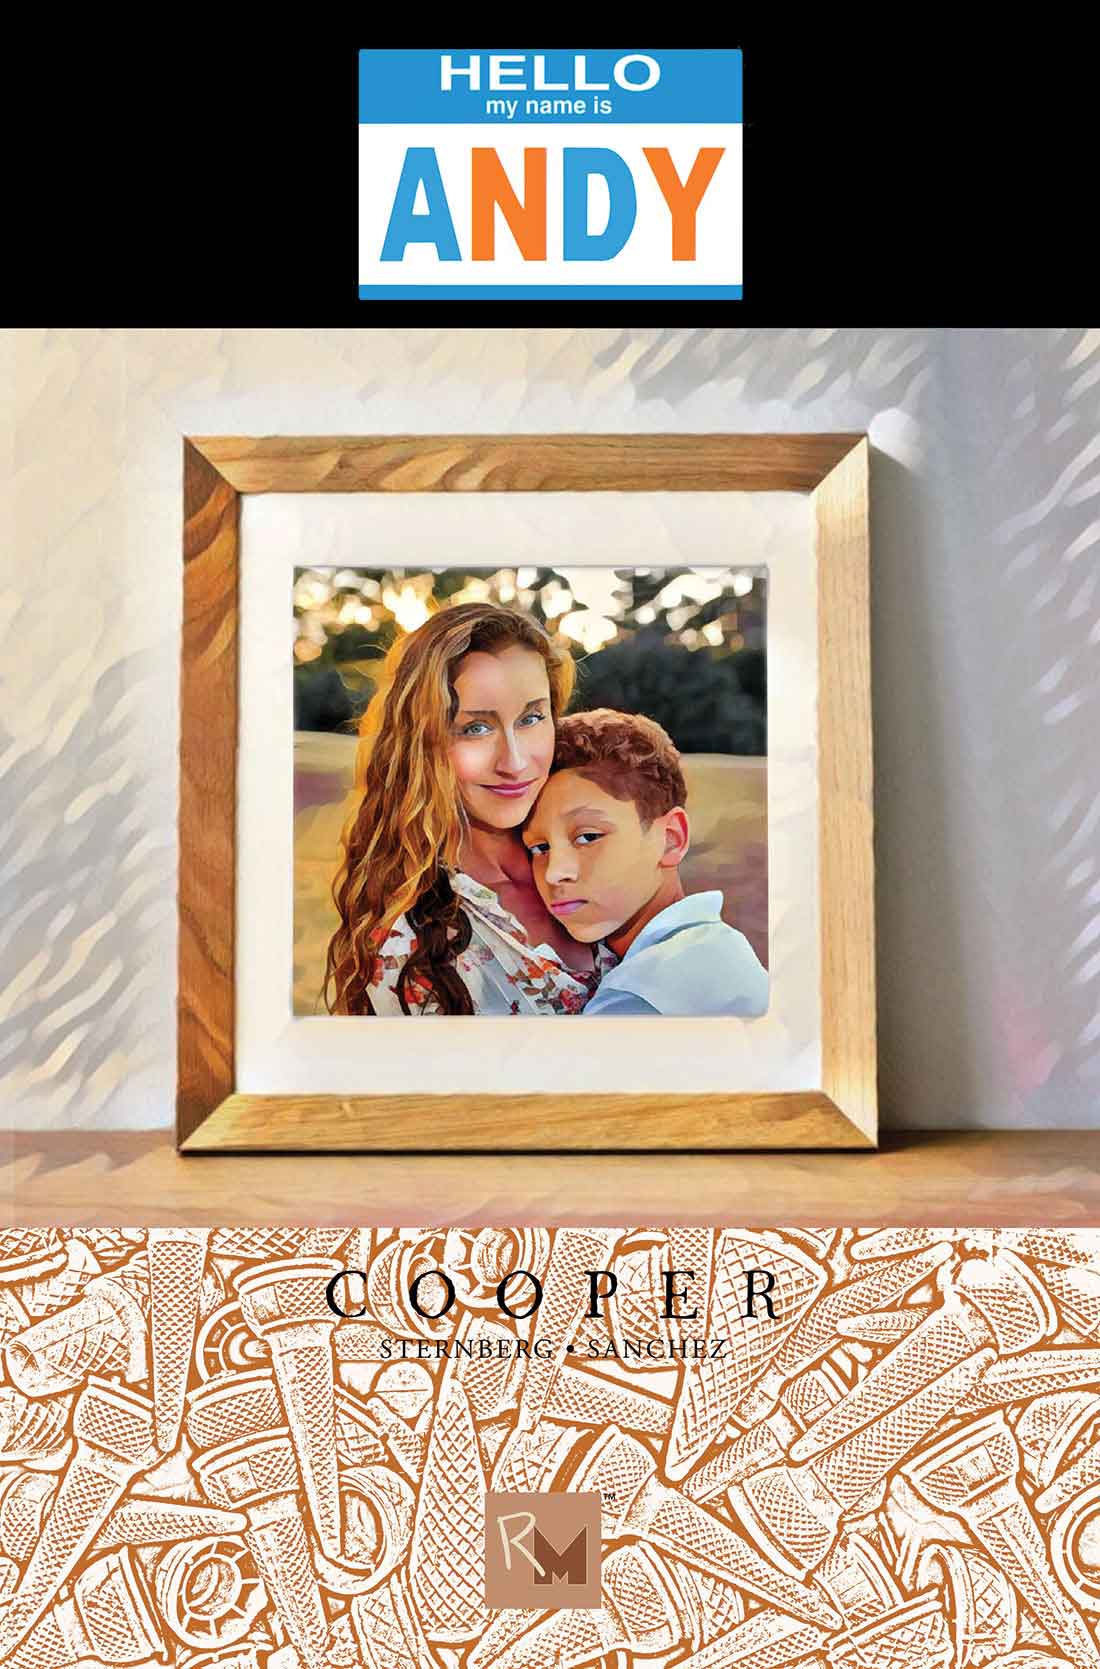 Andy's photo frame "cooper" by STERNBERG & SANCHEZ.